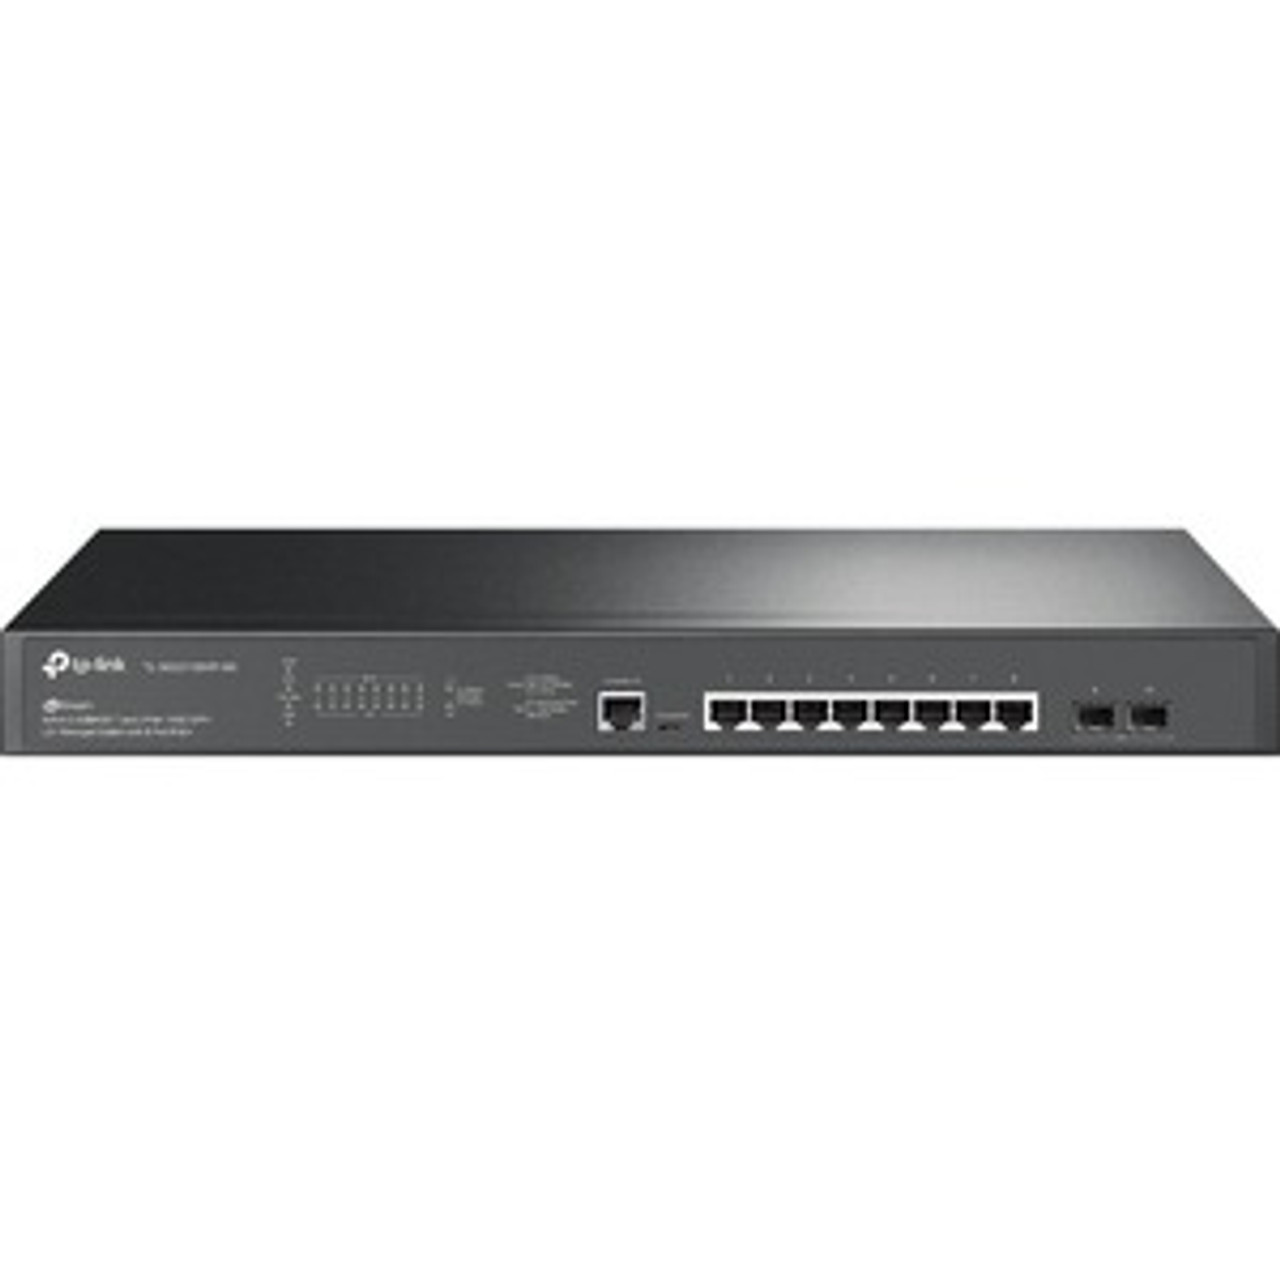 TL-SG3210XHP-M2 TP-Link JetStream TL-SG3210XHP-M2 Ethernet Switch* - 8 Ports - Manageable - 3 Layer Supported - Modular - 291.49 W Power Consumption - 240 W PoE